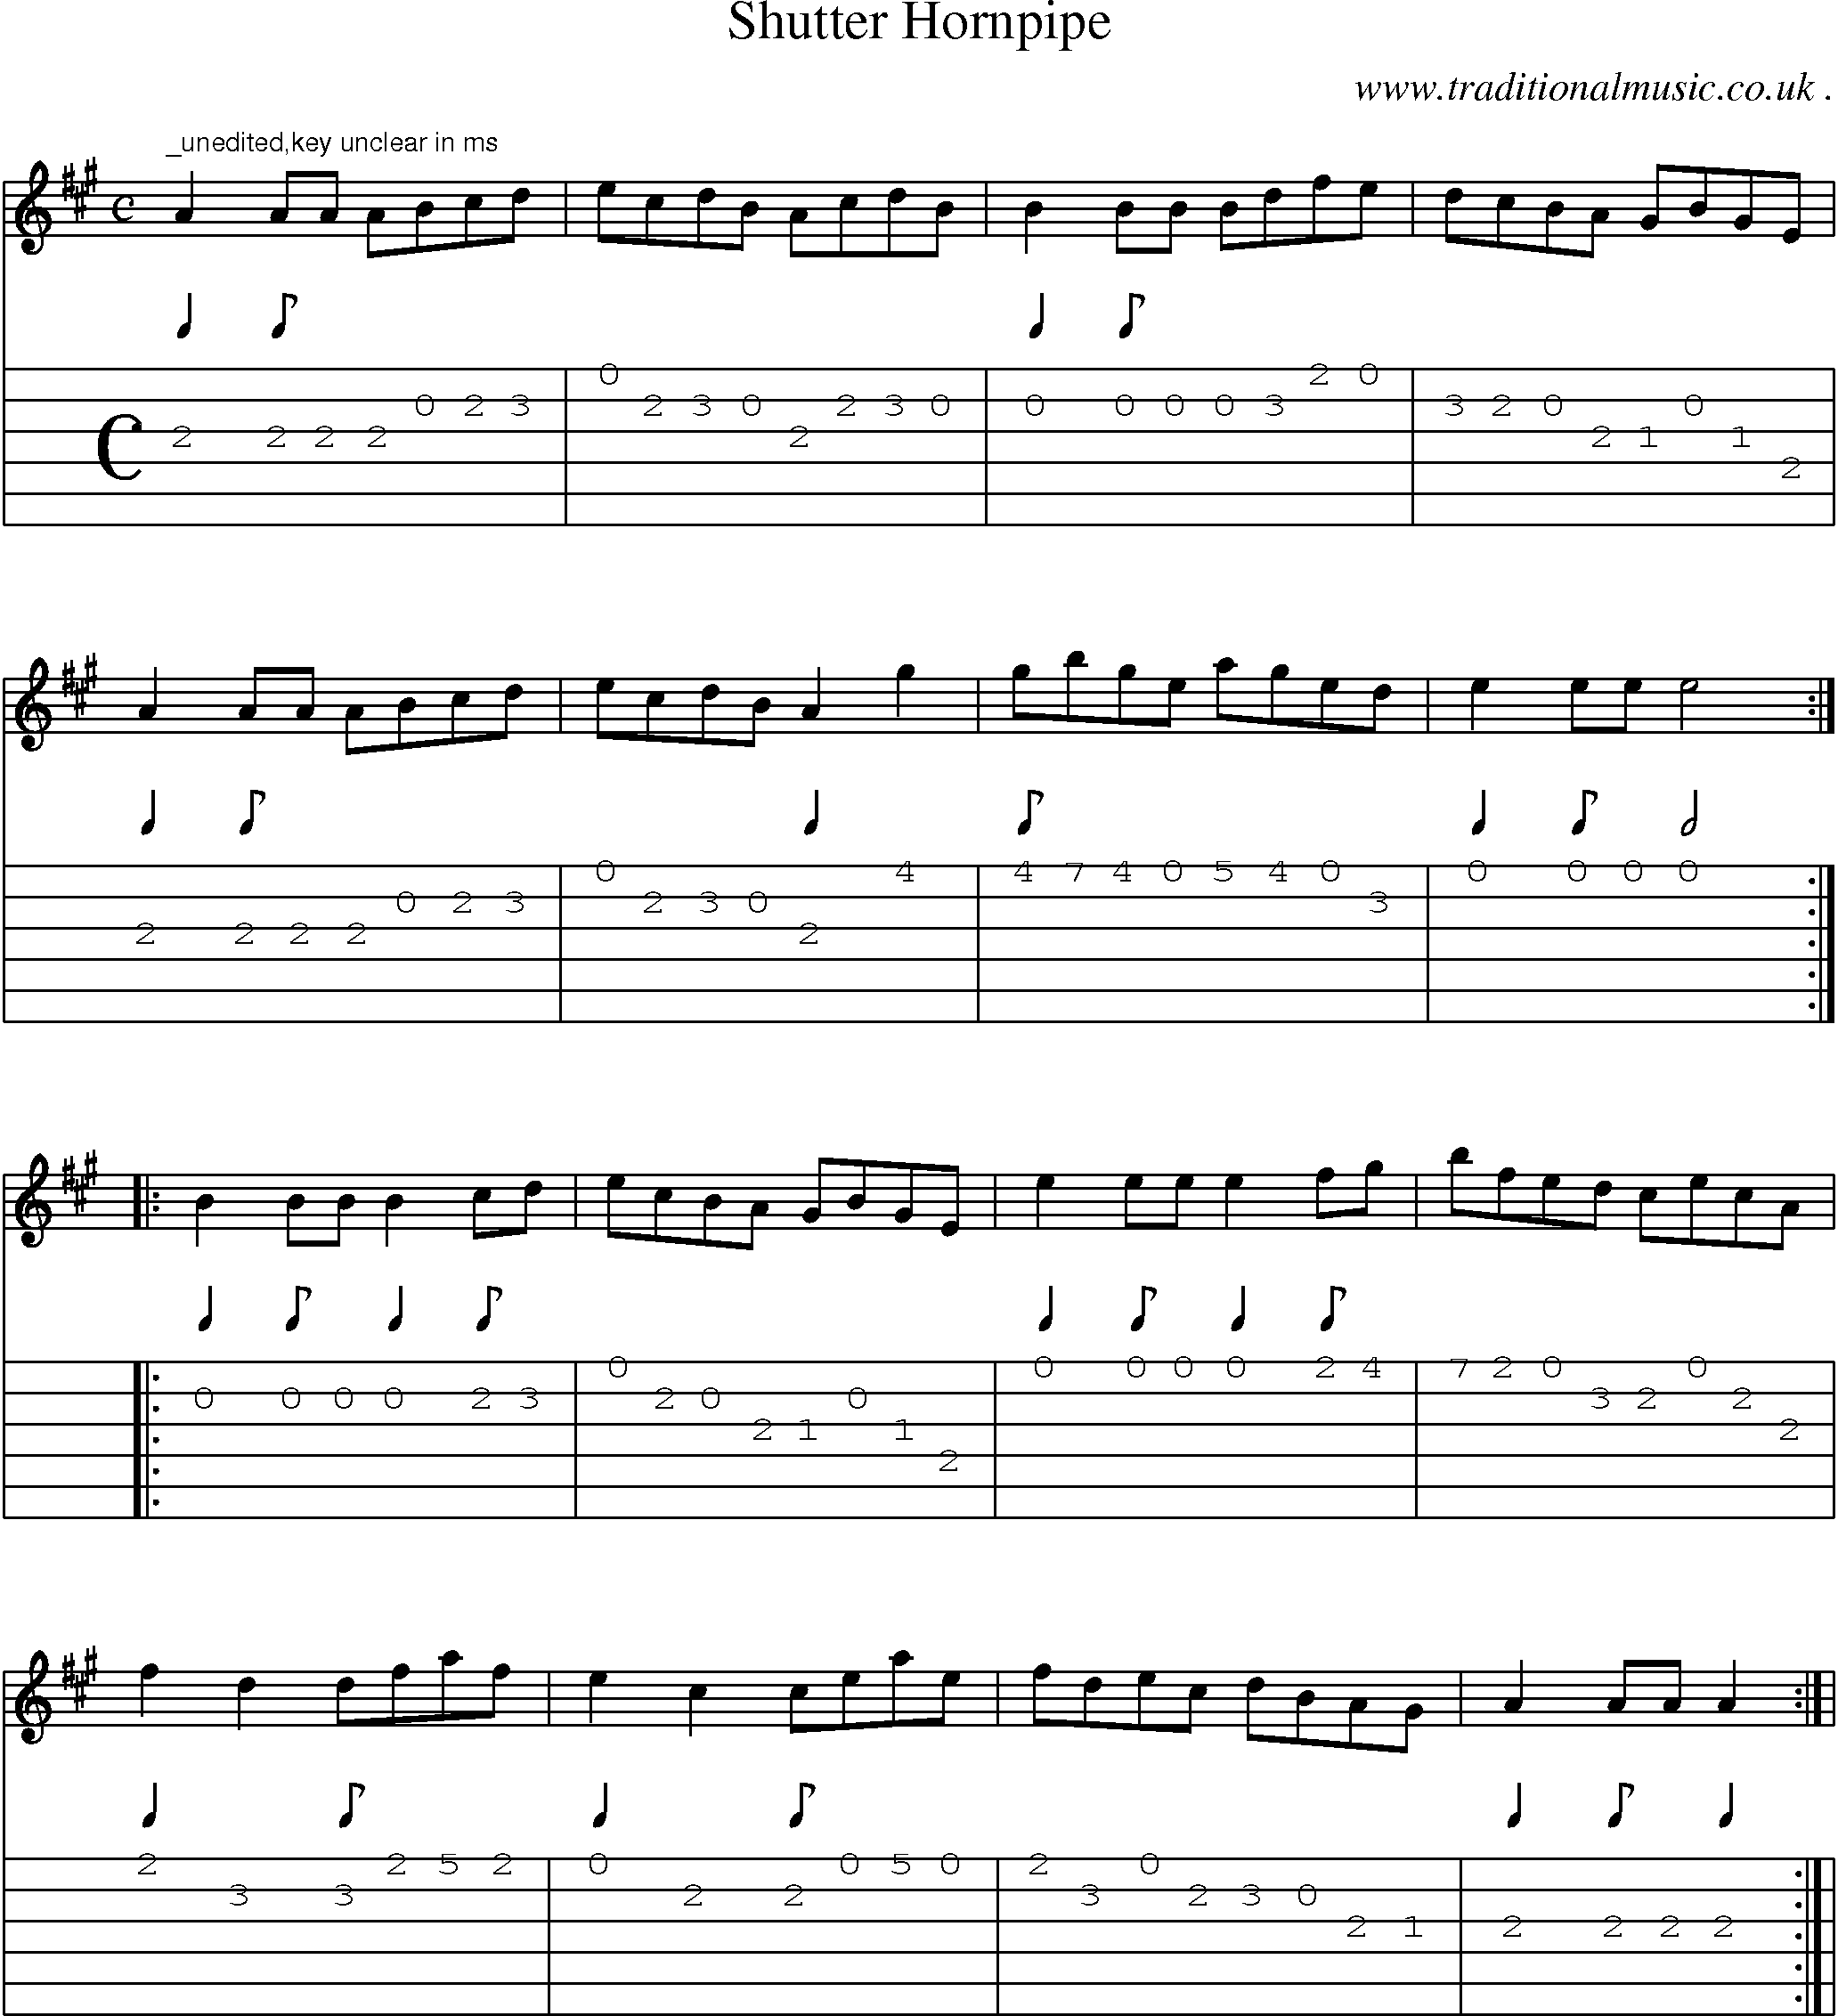 Sheet-Music and Guitar Tabs for Shutter Hornpipe